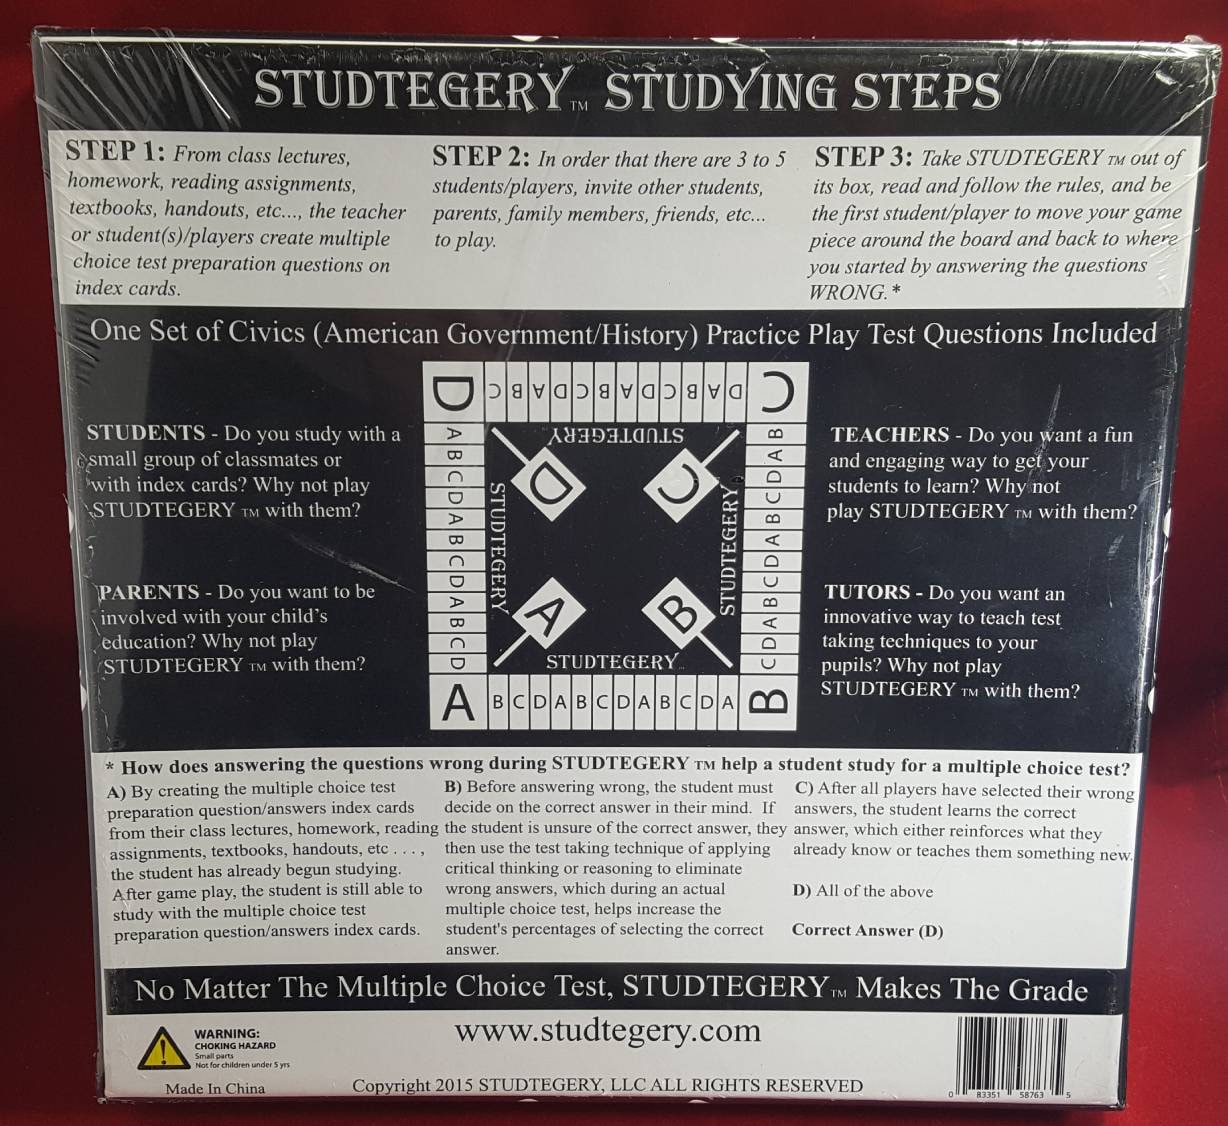 Studtegery: The test preparation board game that combines studying with strategy. NIB